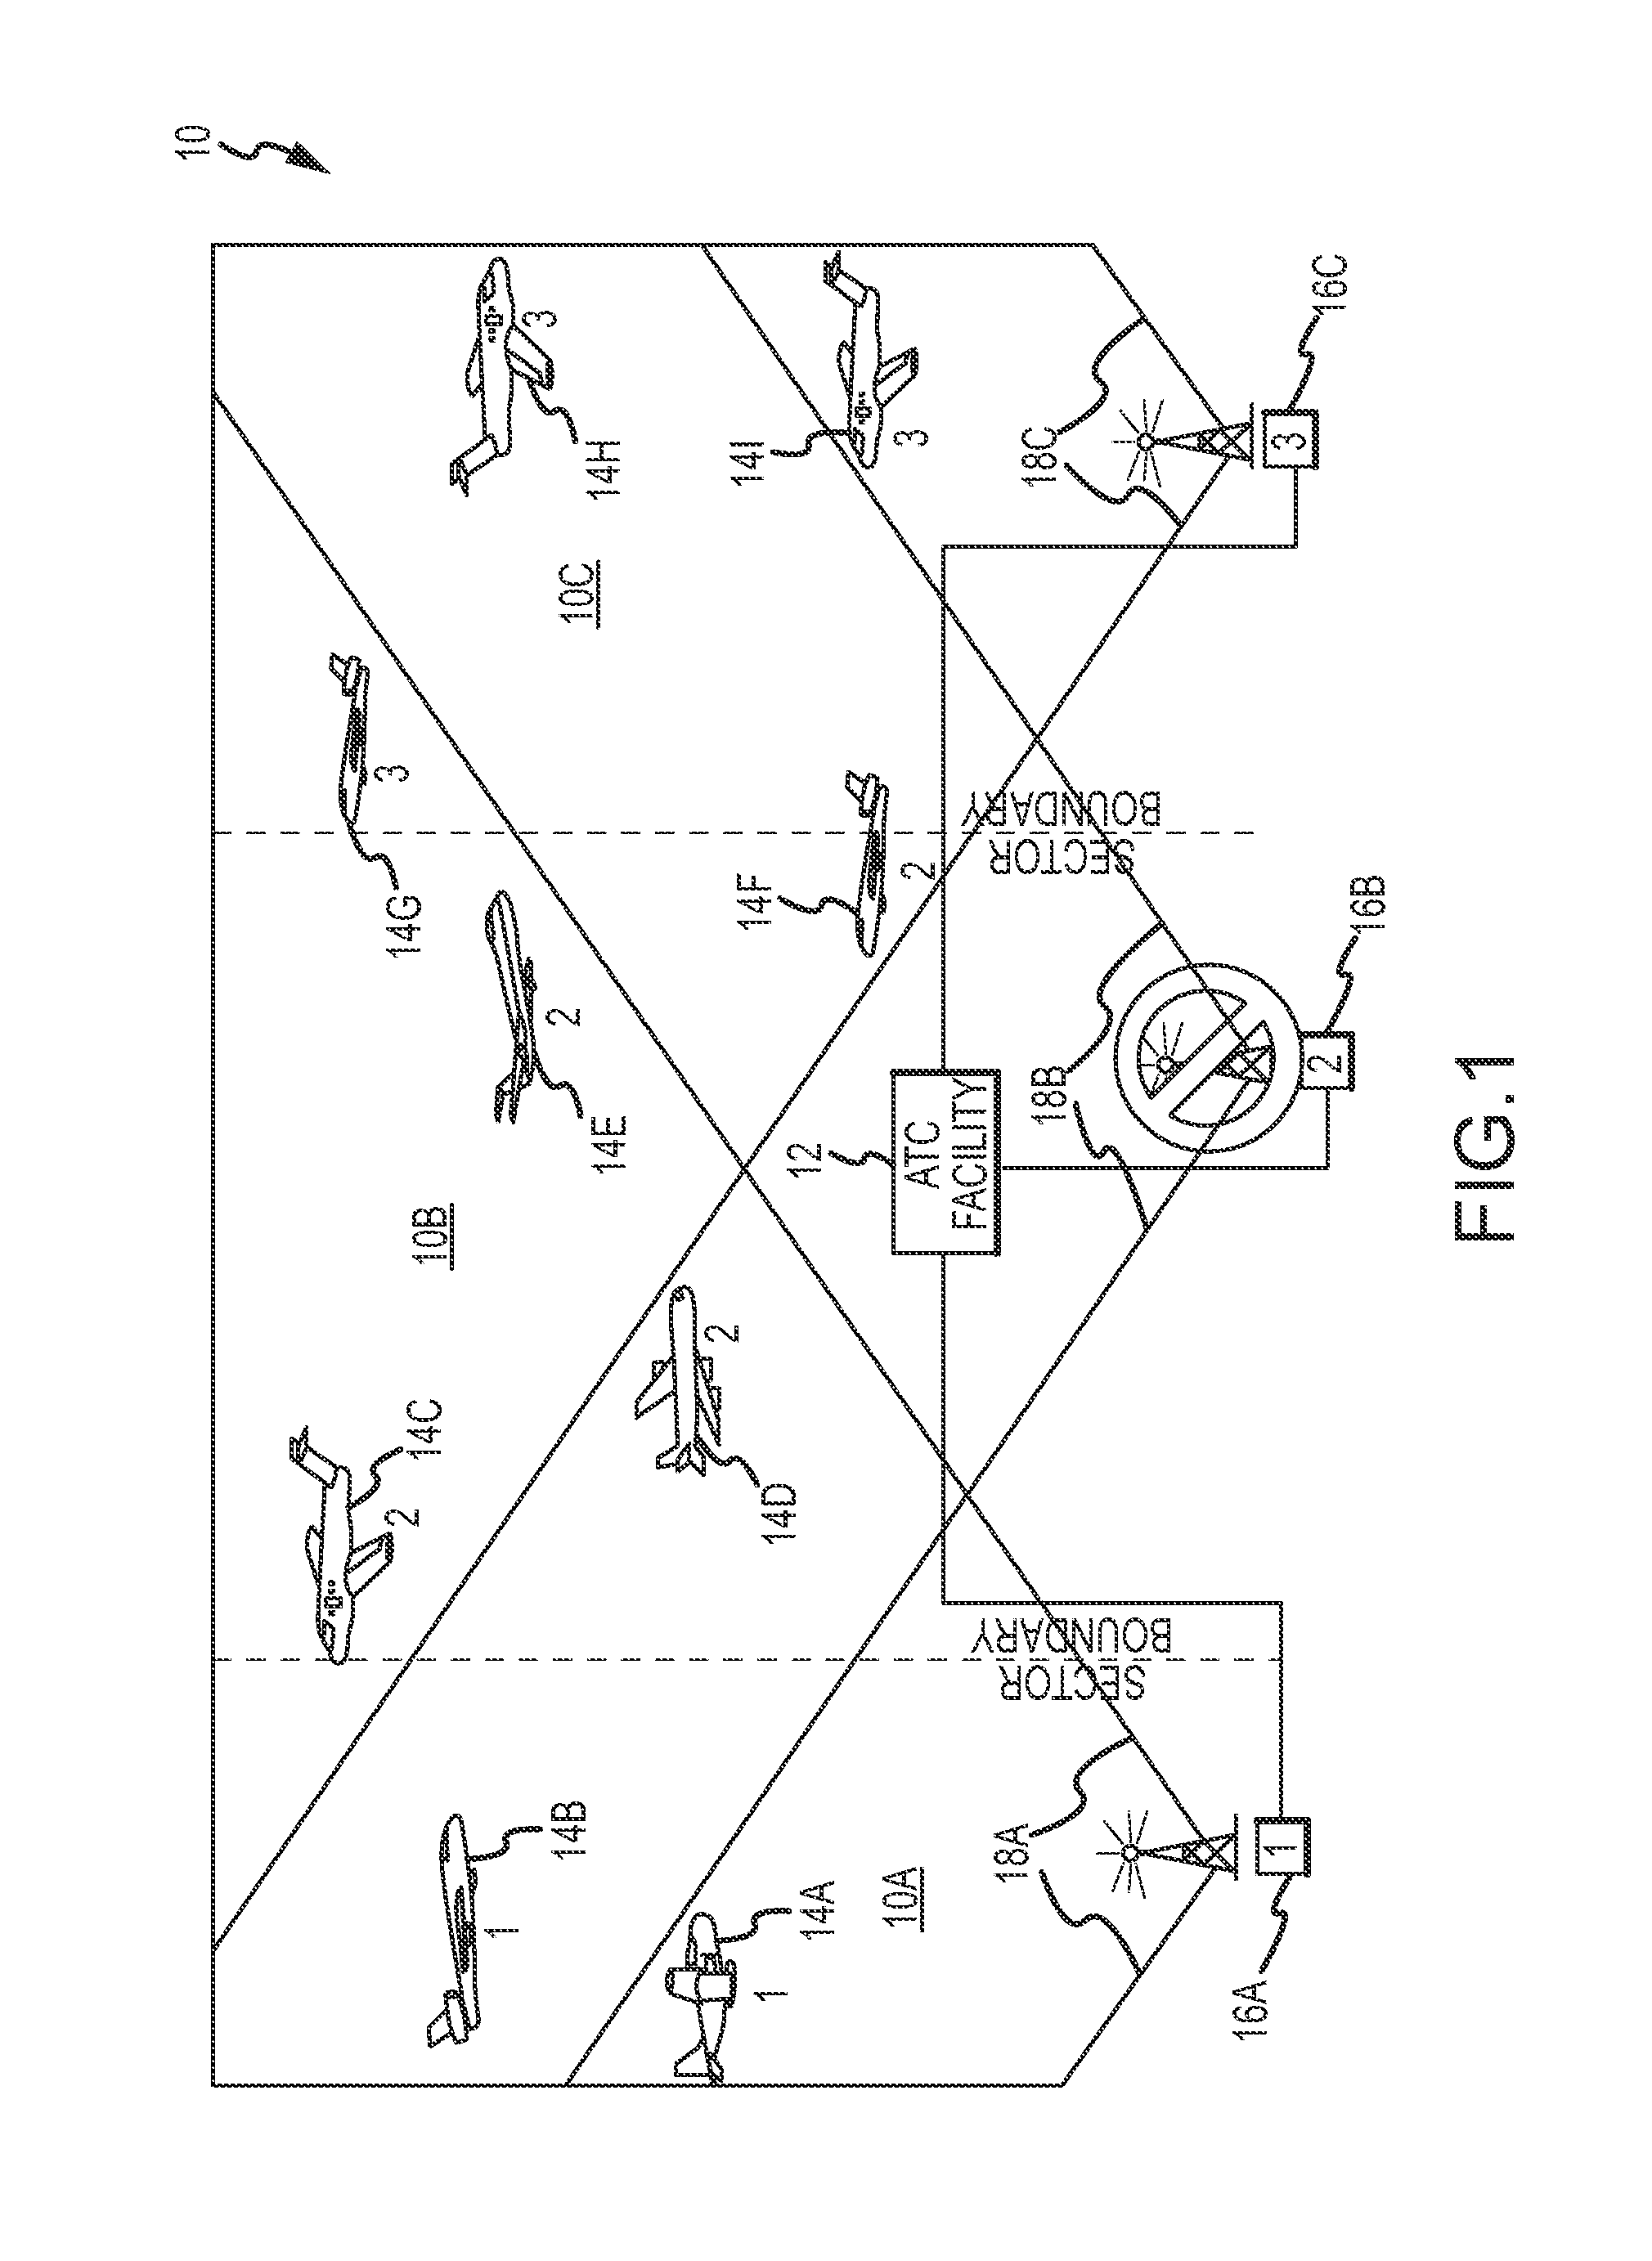 Managing an air-ground communications network with air traffic control information